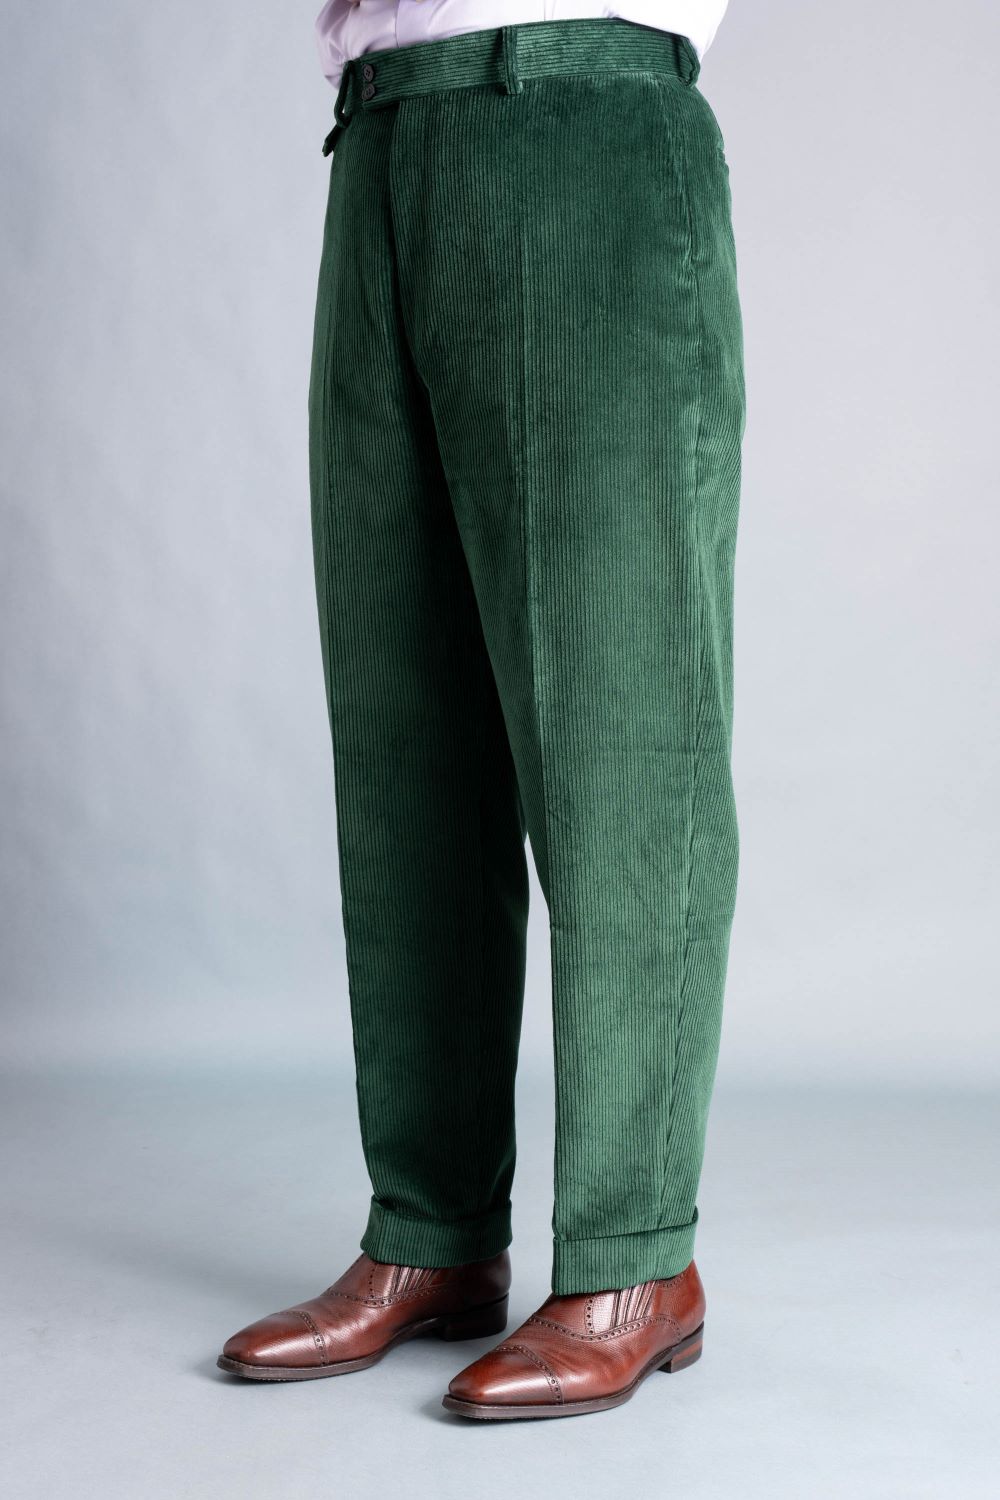 Full front side view of British Racing Green Stancliffe corduroy trousers by Fort Belvedere